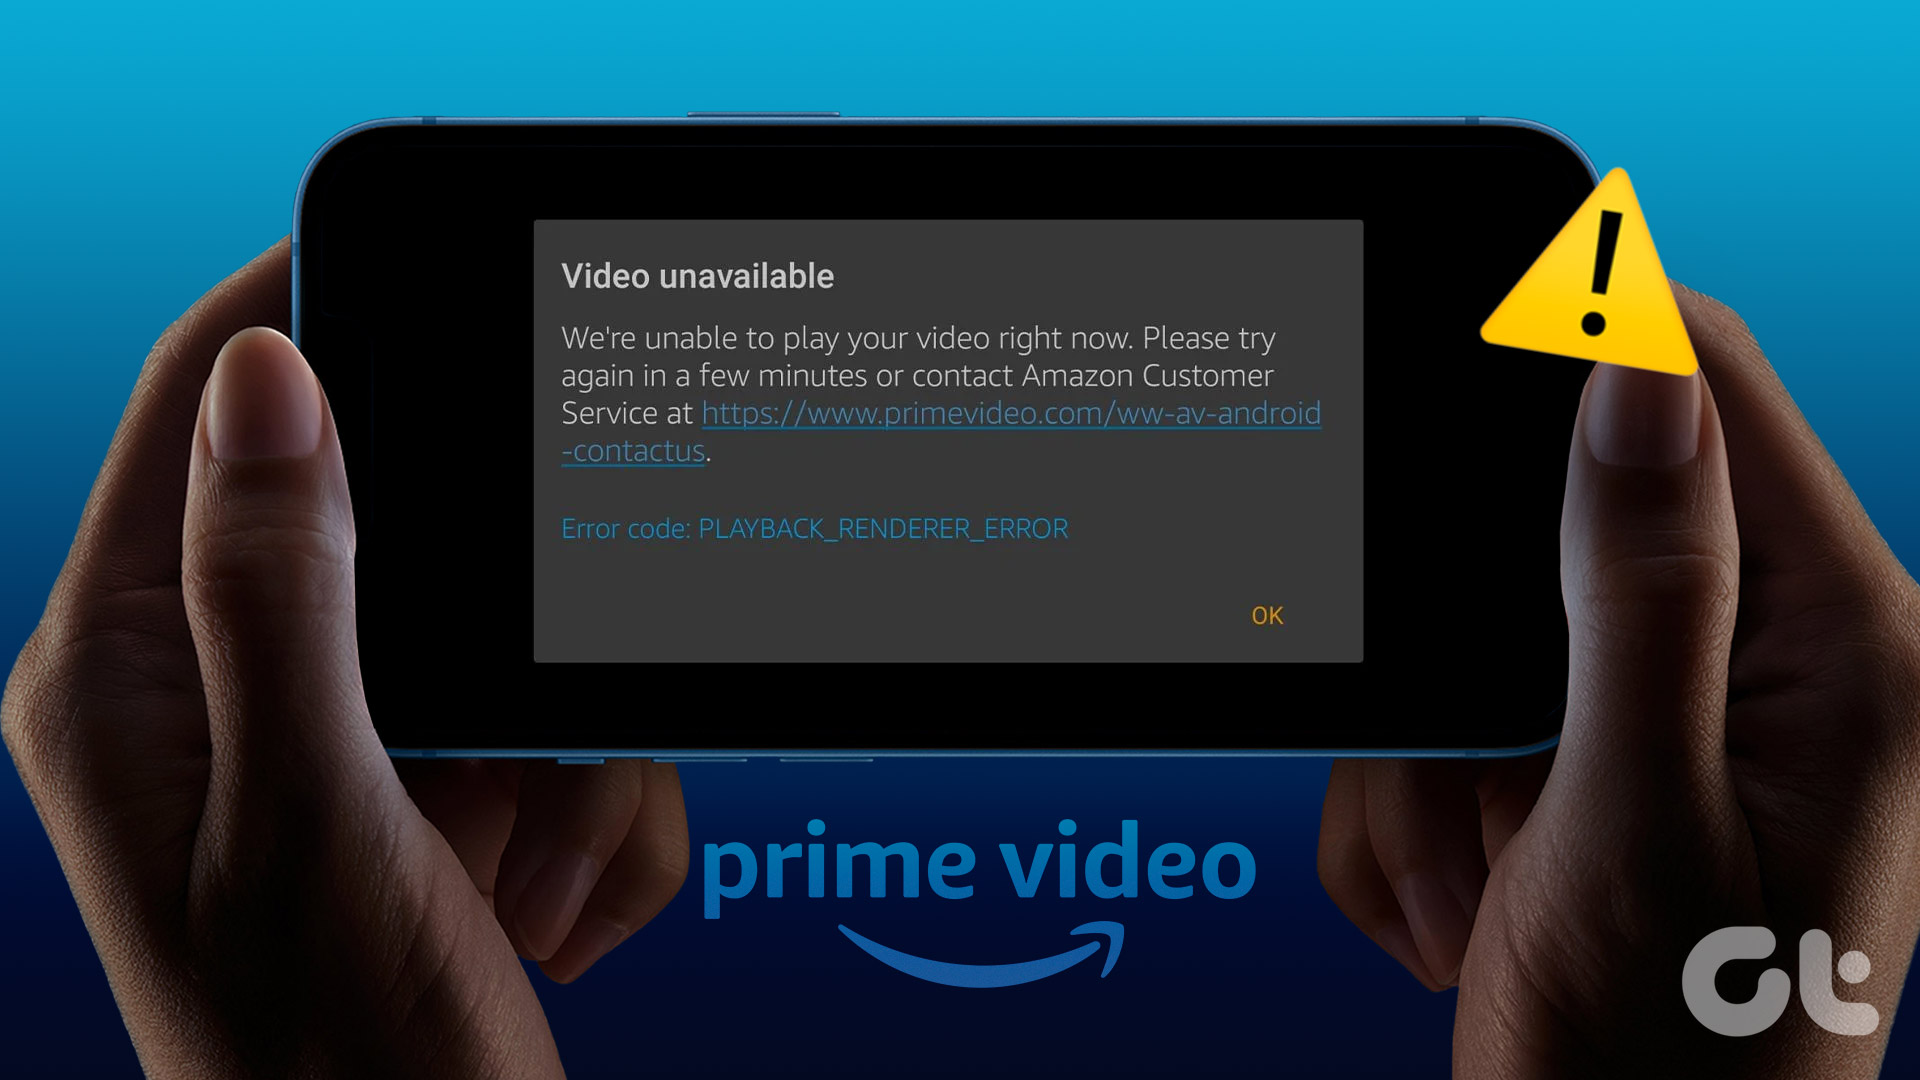 13 Ways to Fix Video Unavailable in  Prime Video - Guiding Tech